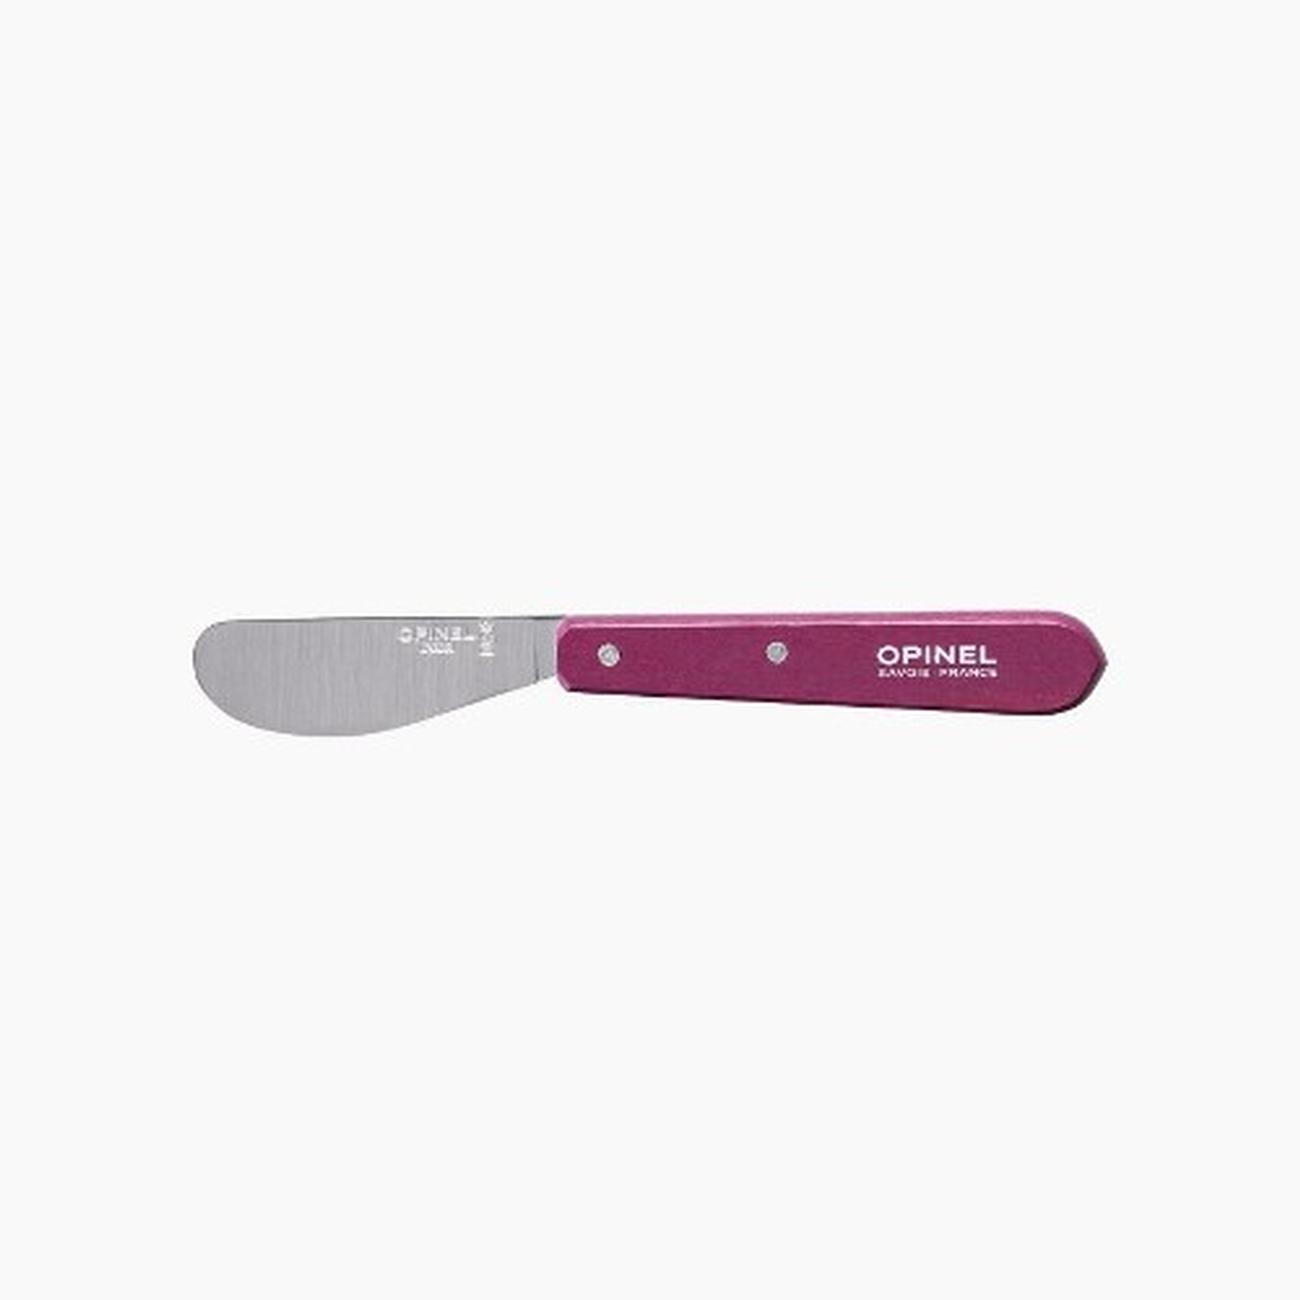 opinel-no117-spreading-knife-plum  - Opinel No.117 Spreading Knife Plum